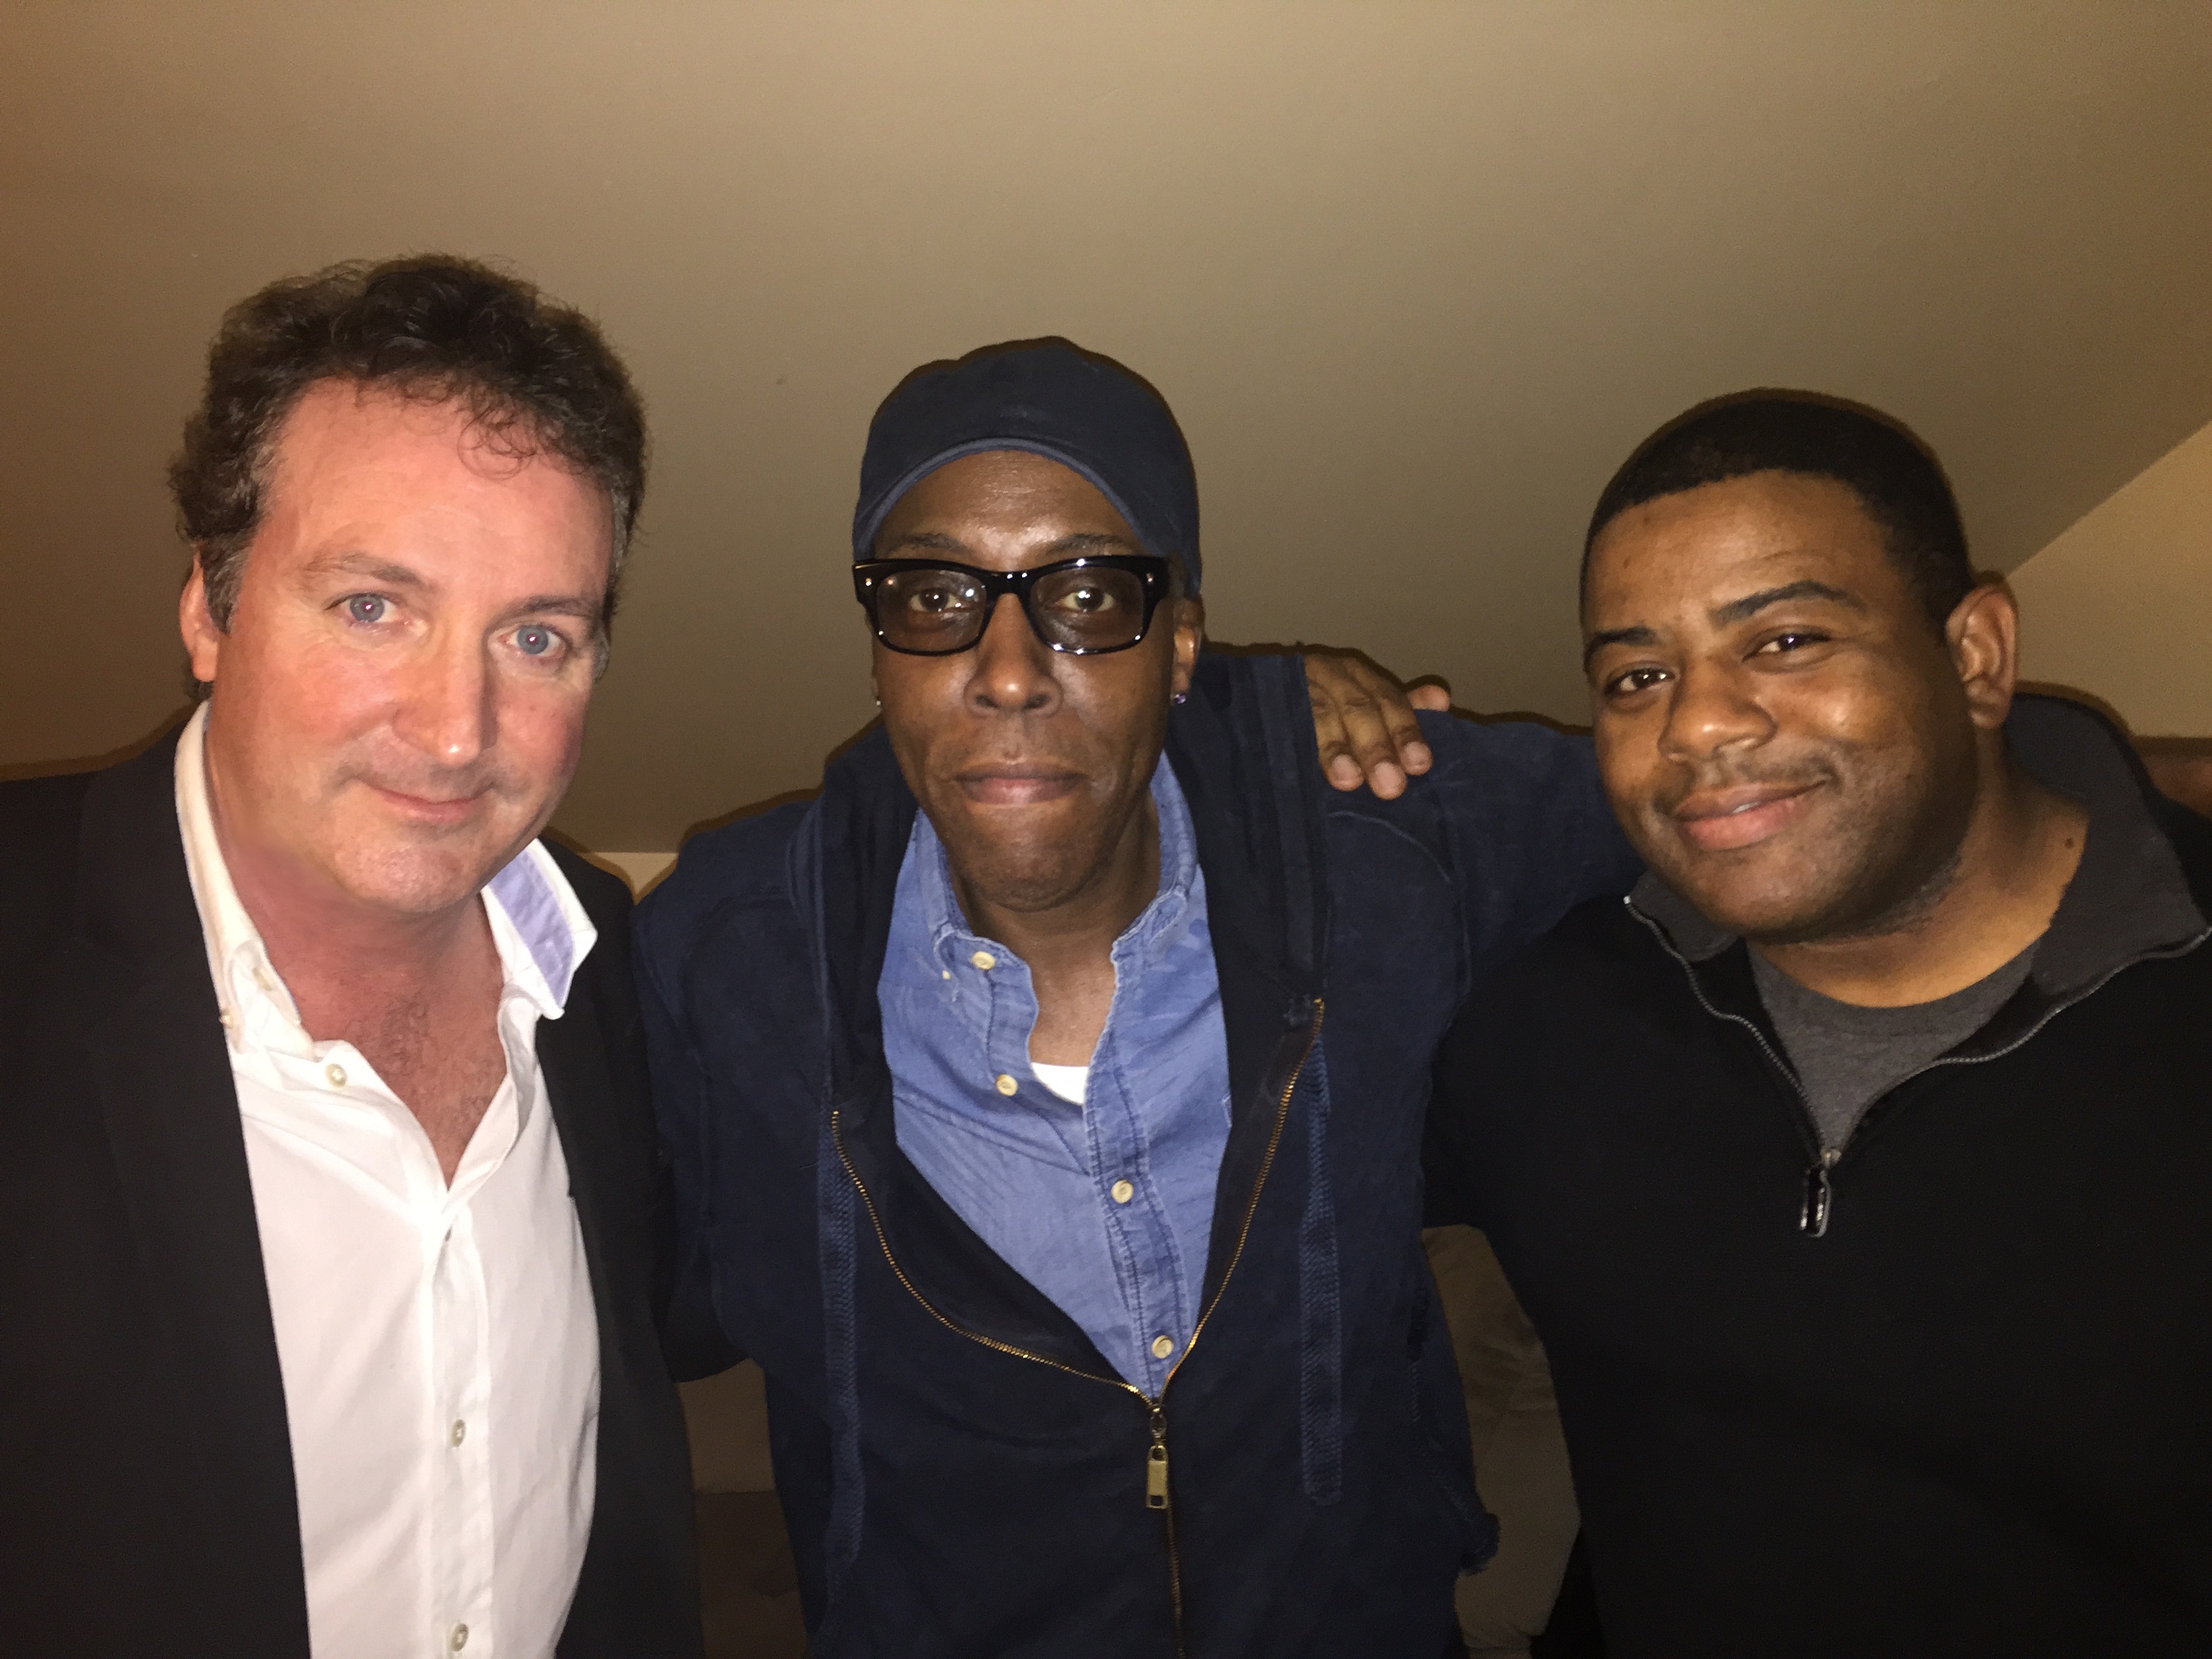 Bill Devlin, Arsenio Hall and Actor Keeshan Giles in the Green room at Bill Devlin's Comedy & Cocktails